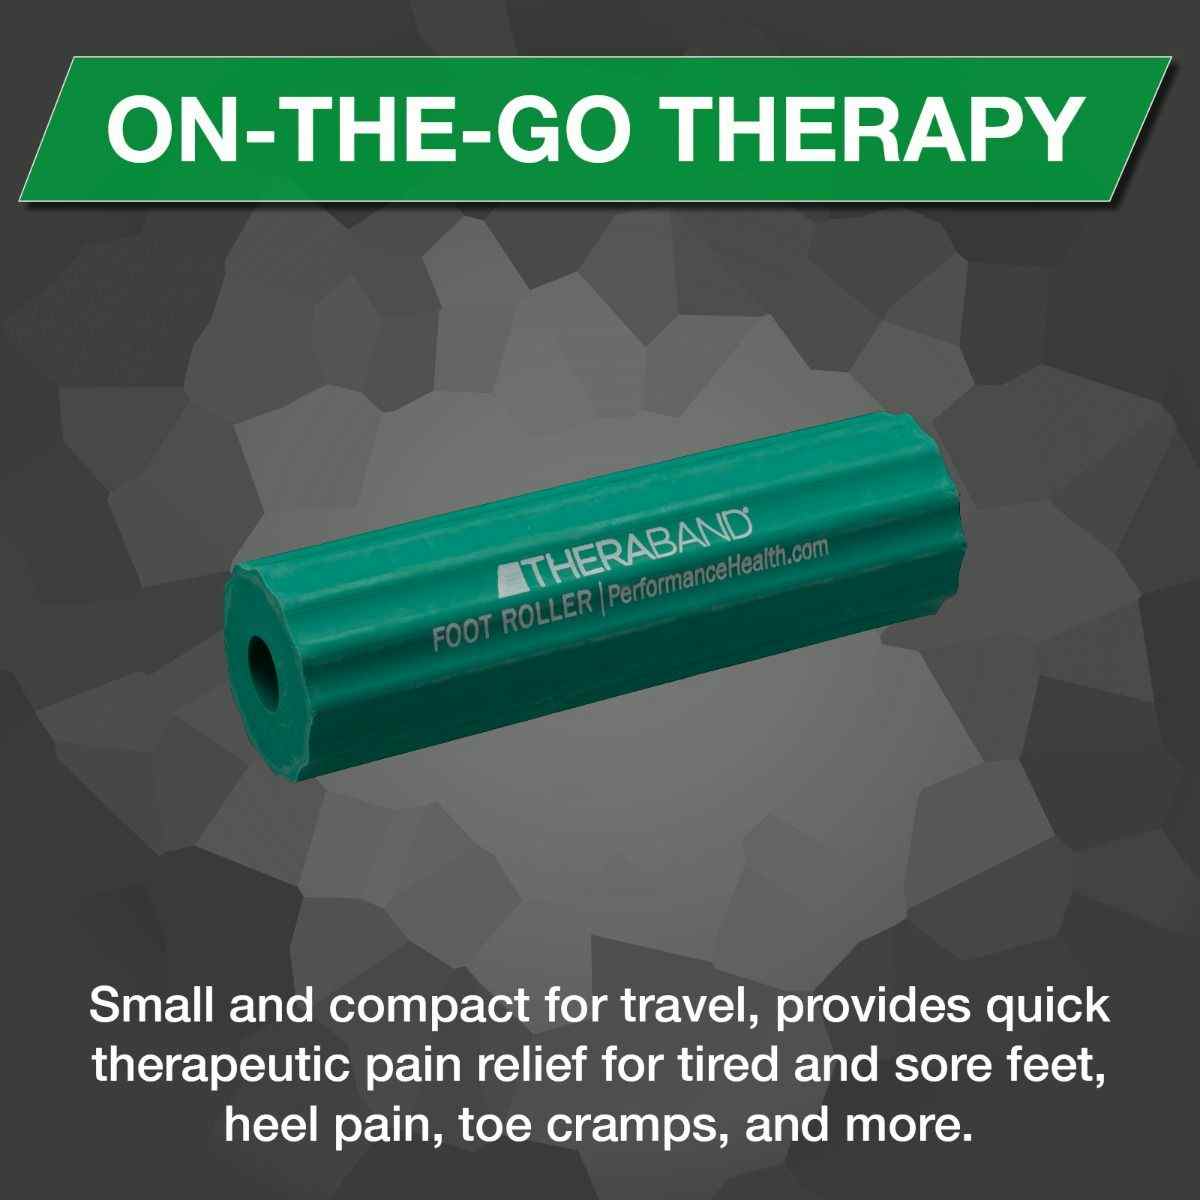 TheraBand Foot Roller, informational